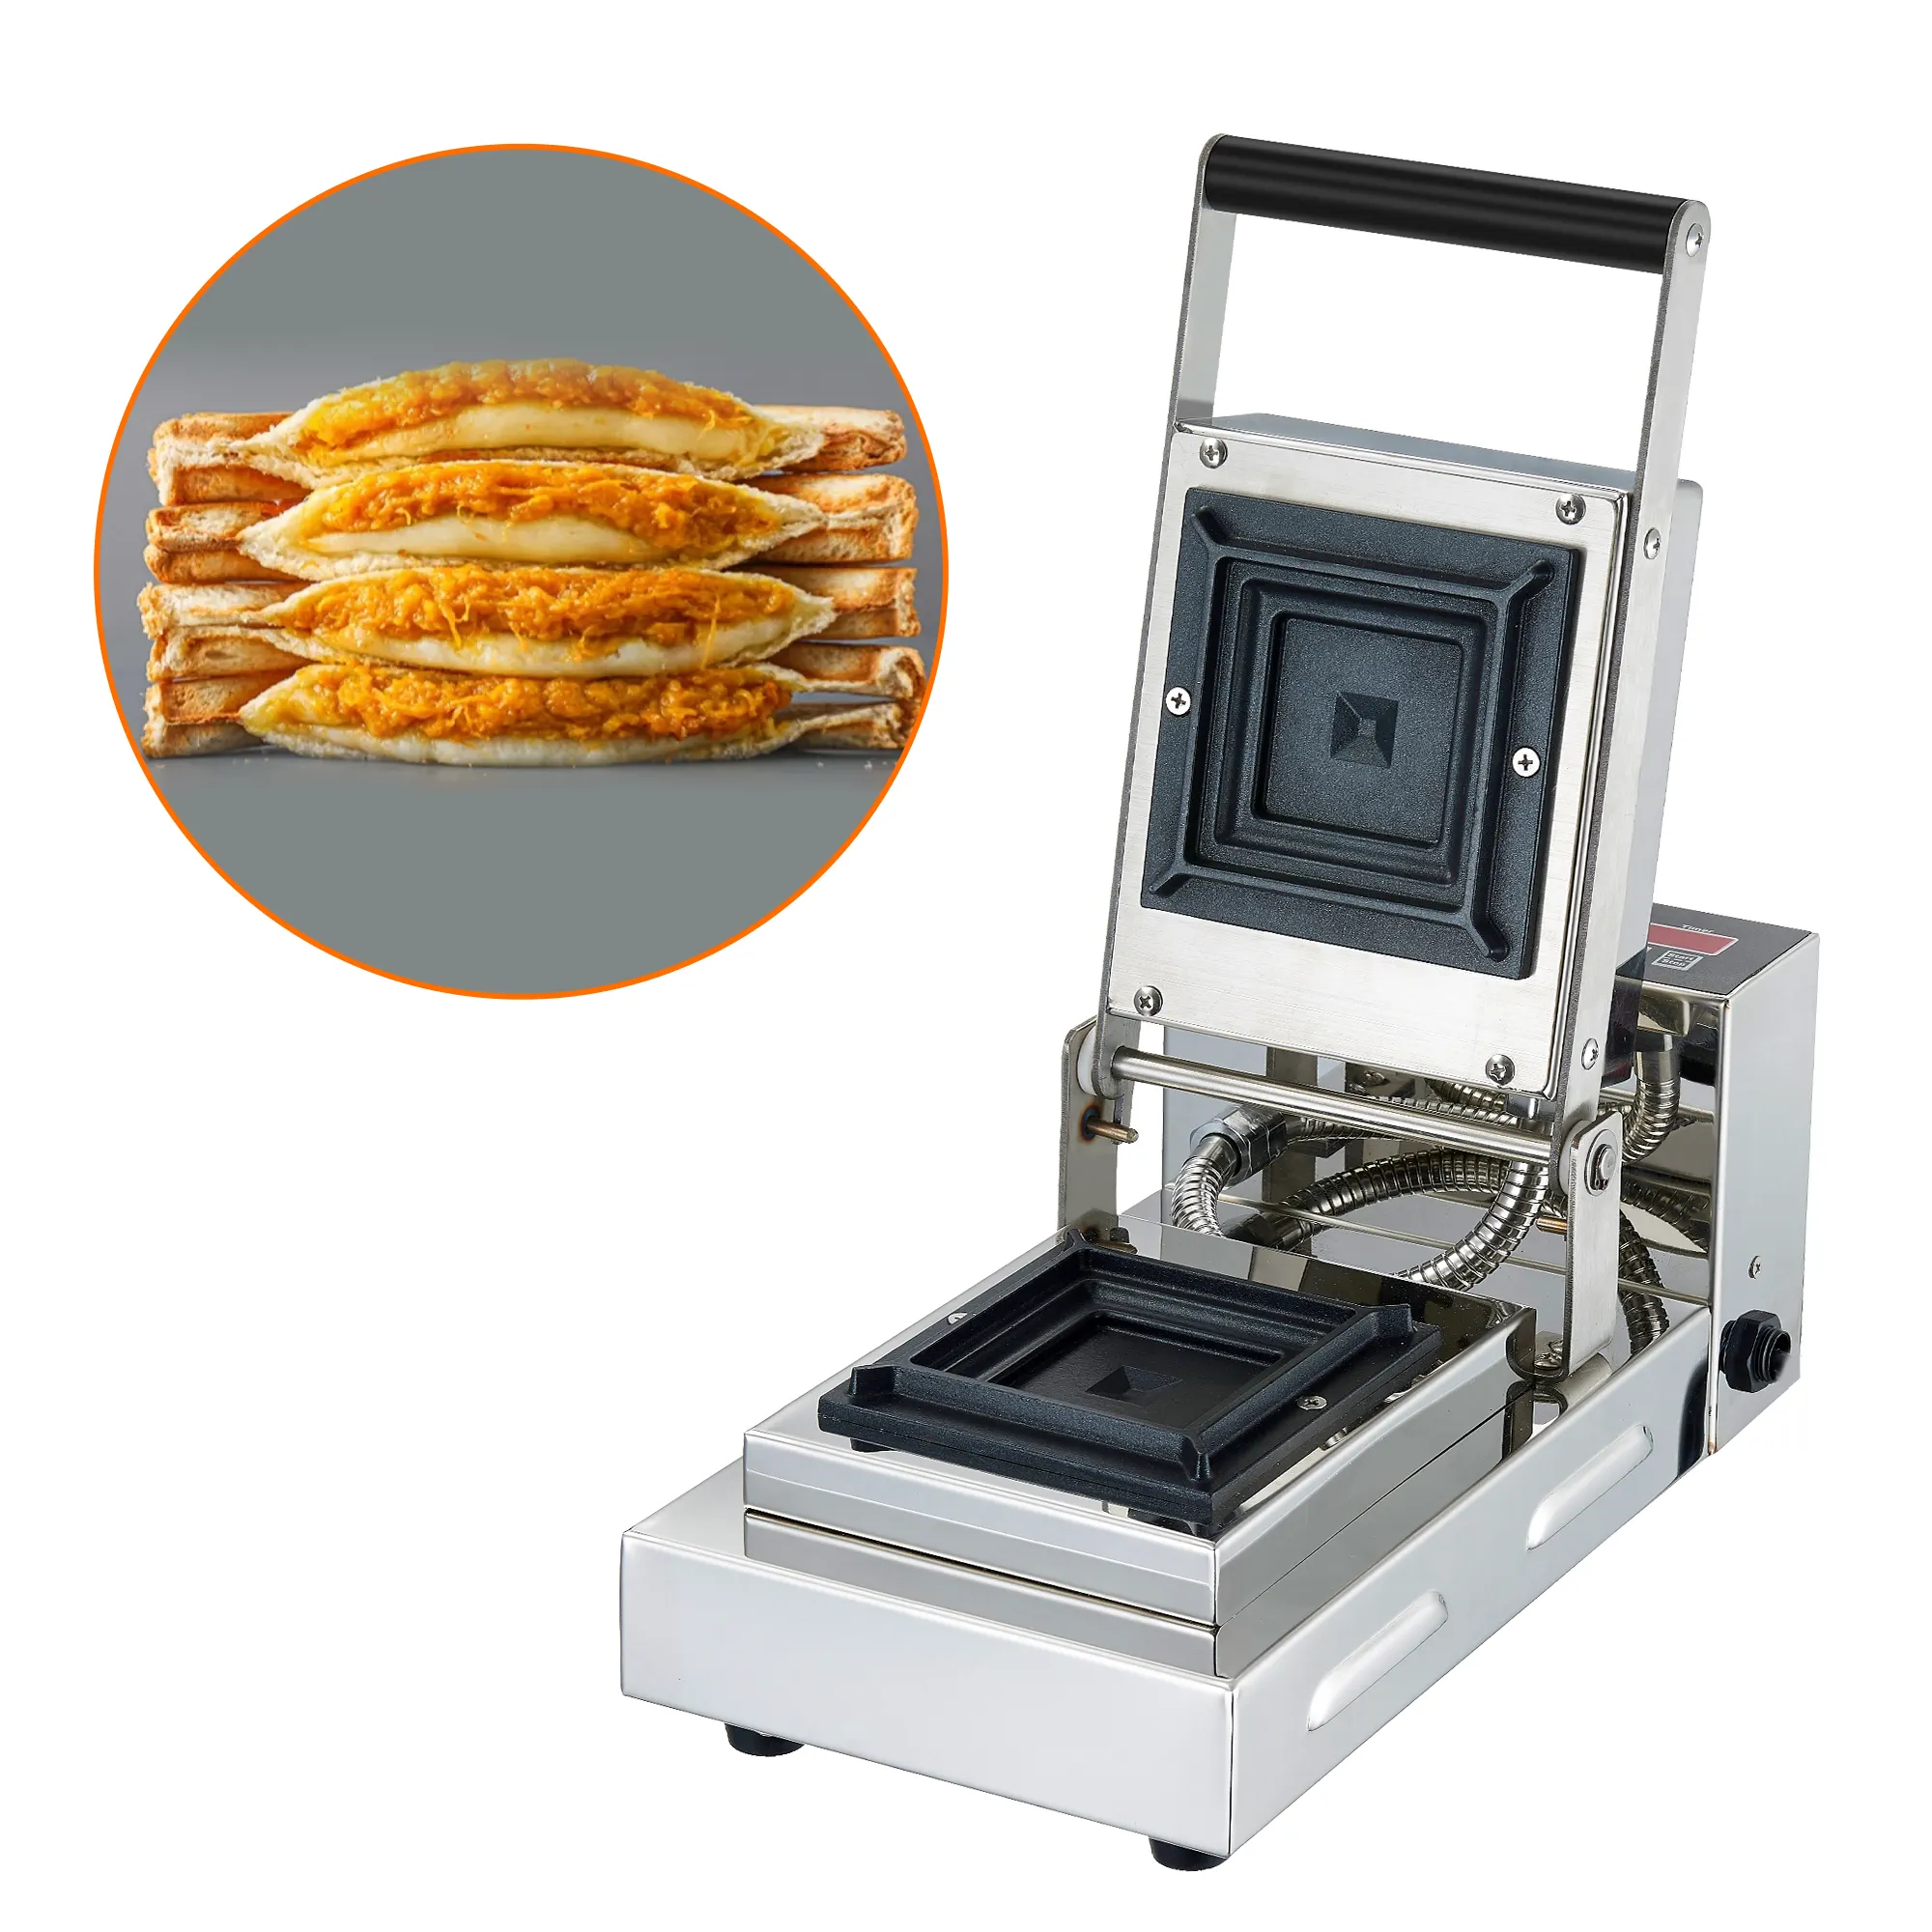 New Type Safe Durable Detachable Square Home Electric Waffle Maker Quickly Making Breakfast Sandwich Maker Toaster